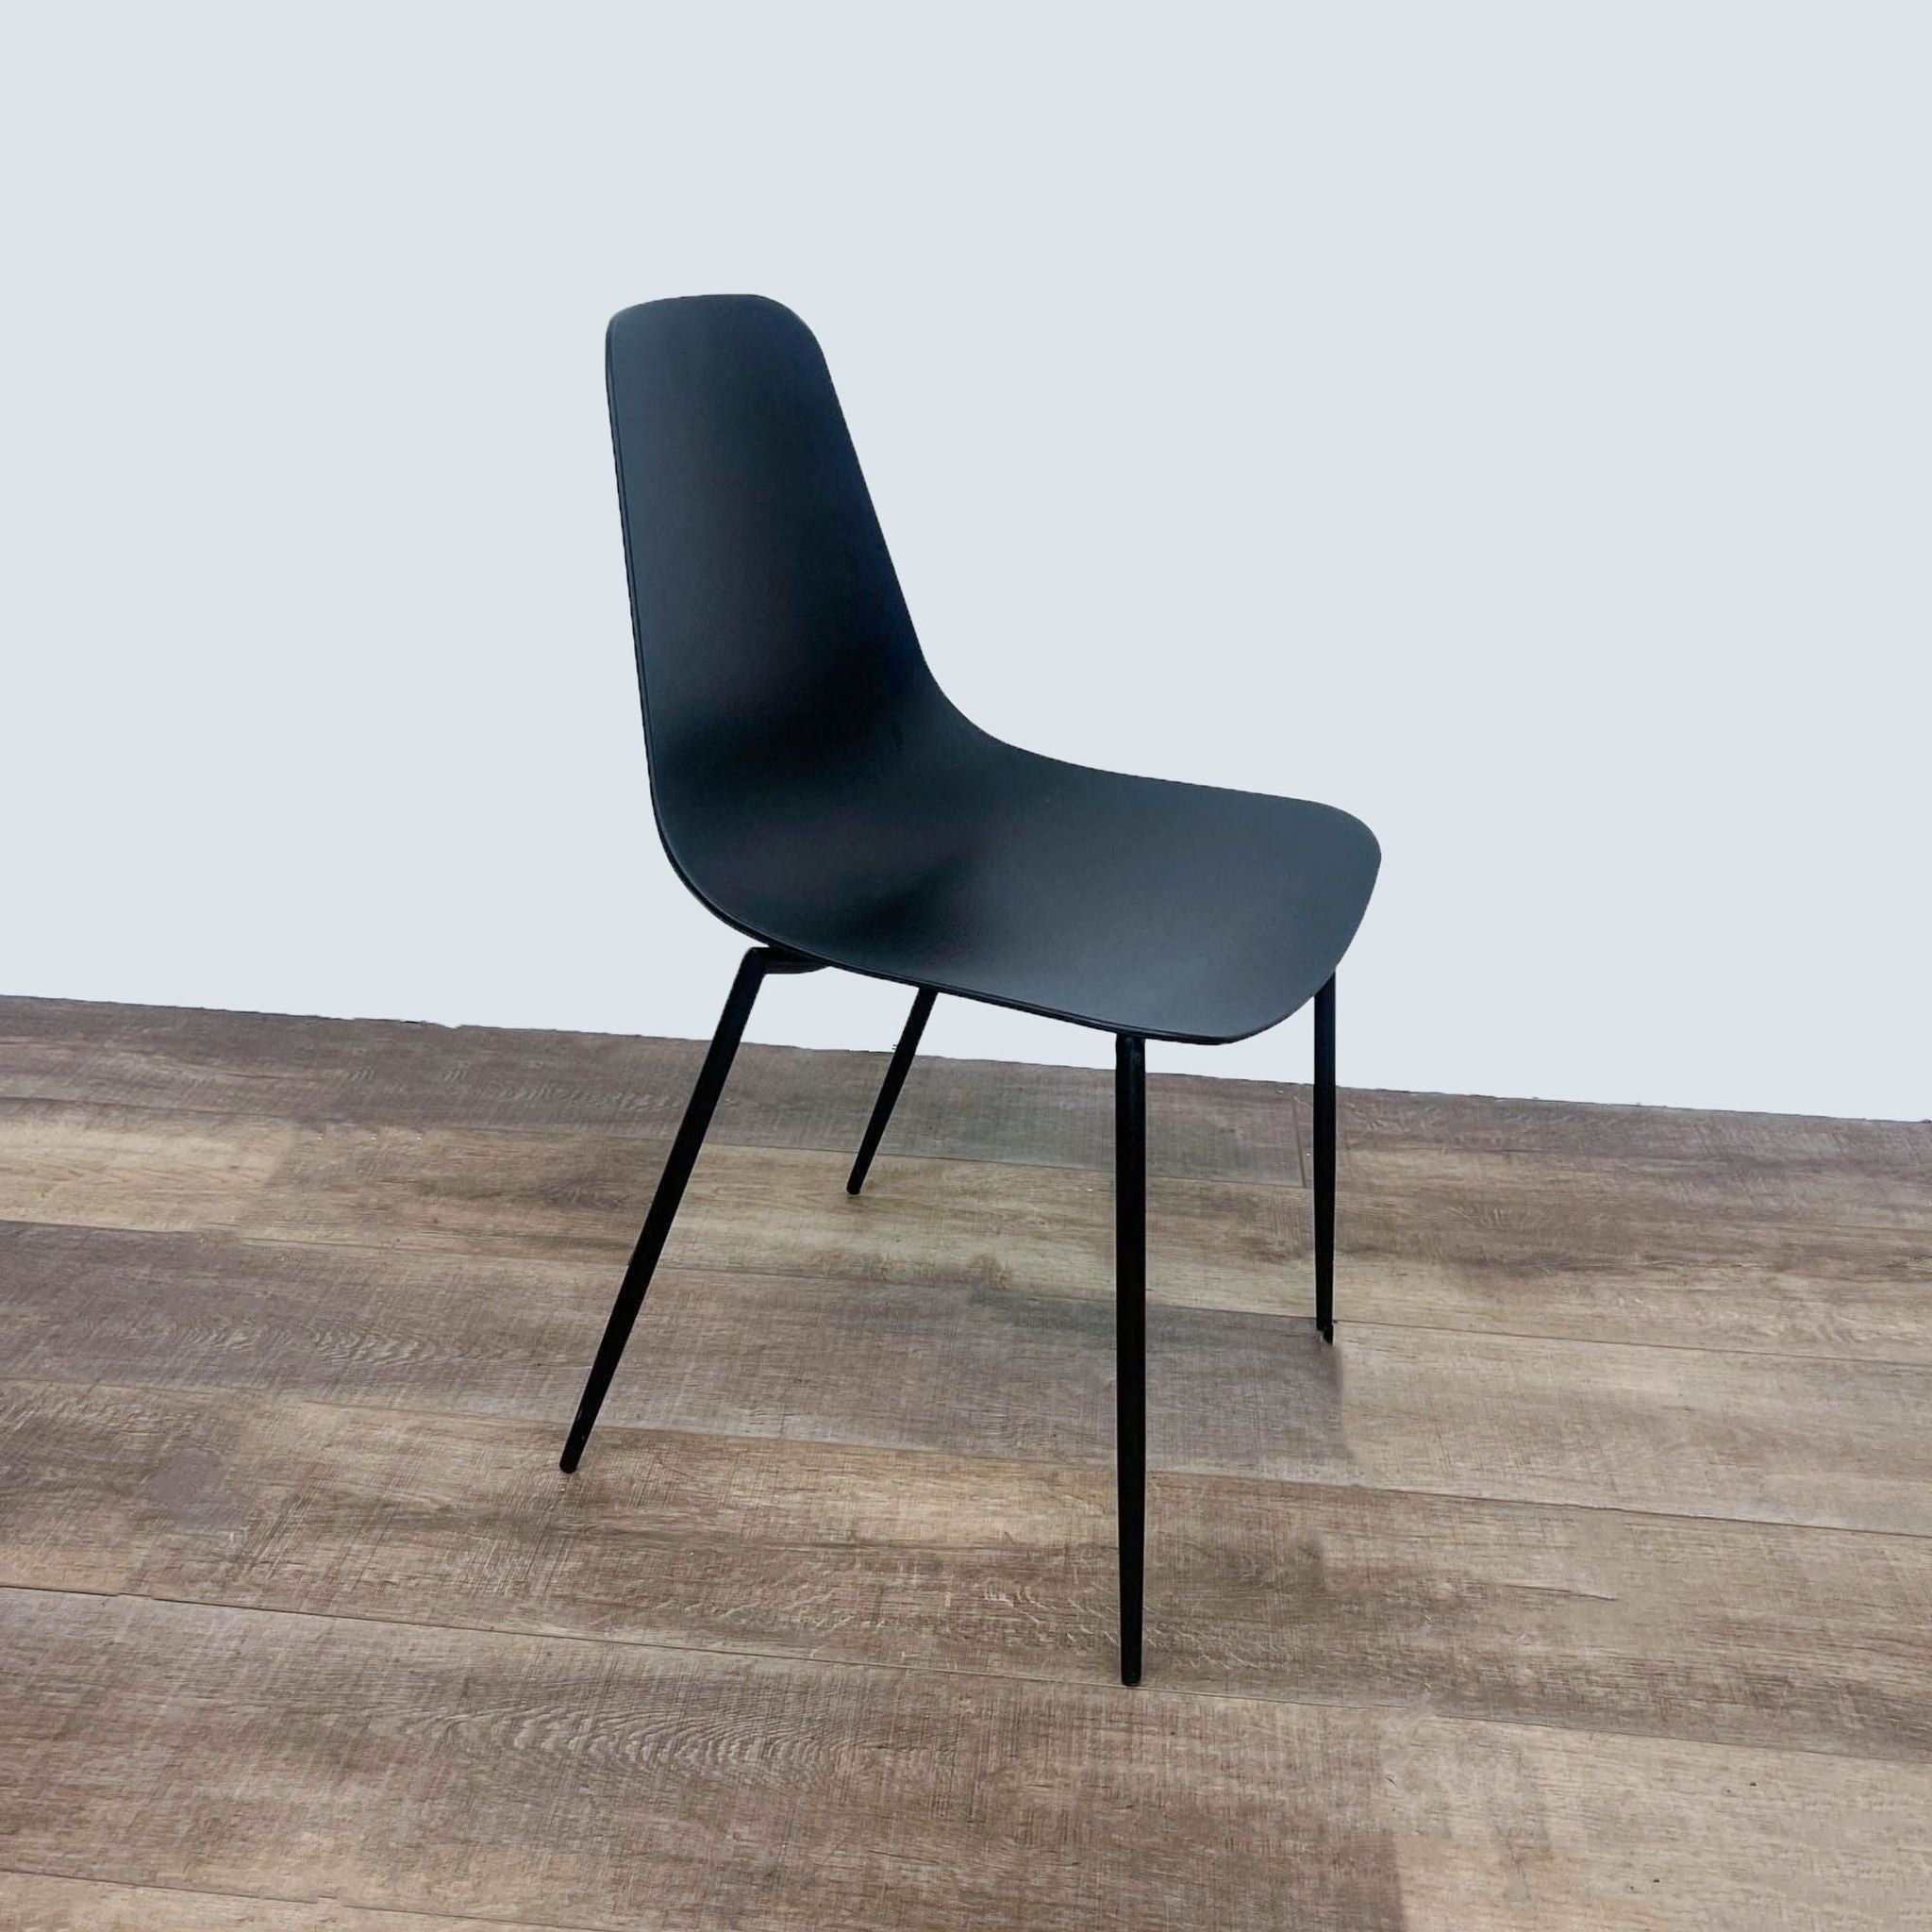 Reperch contemporary black dining chair, profile view showcasing contoured seat and tubular metal legs.